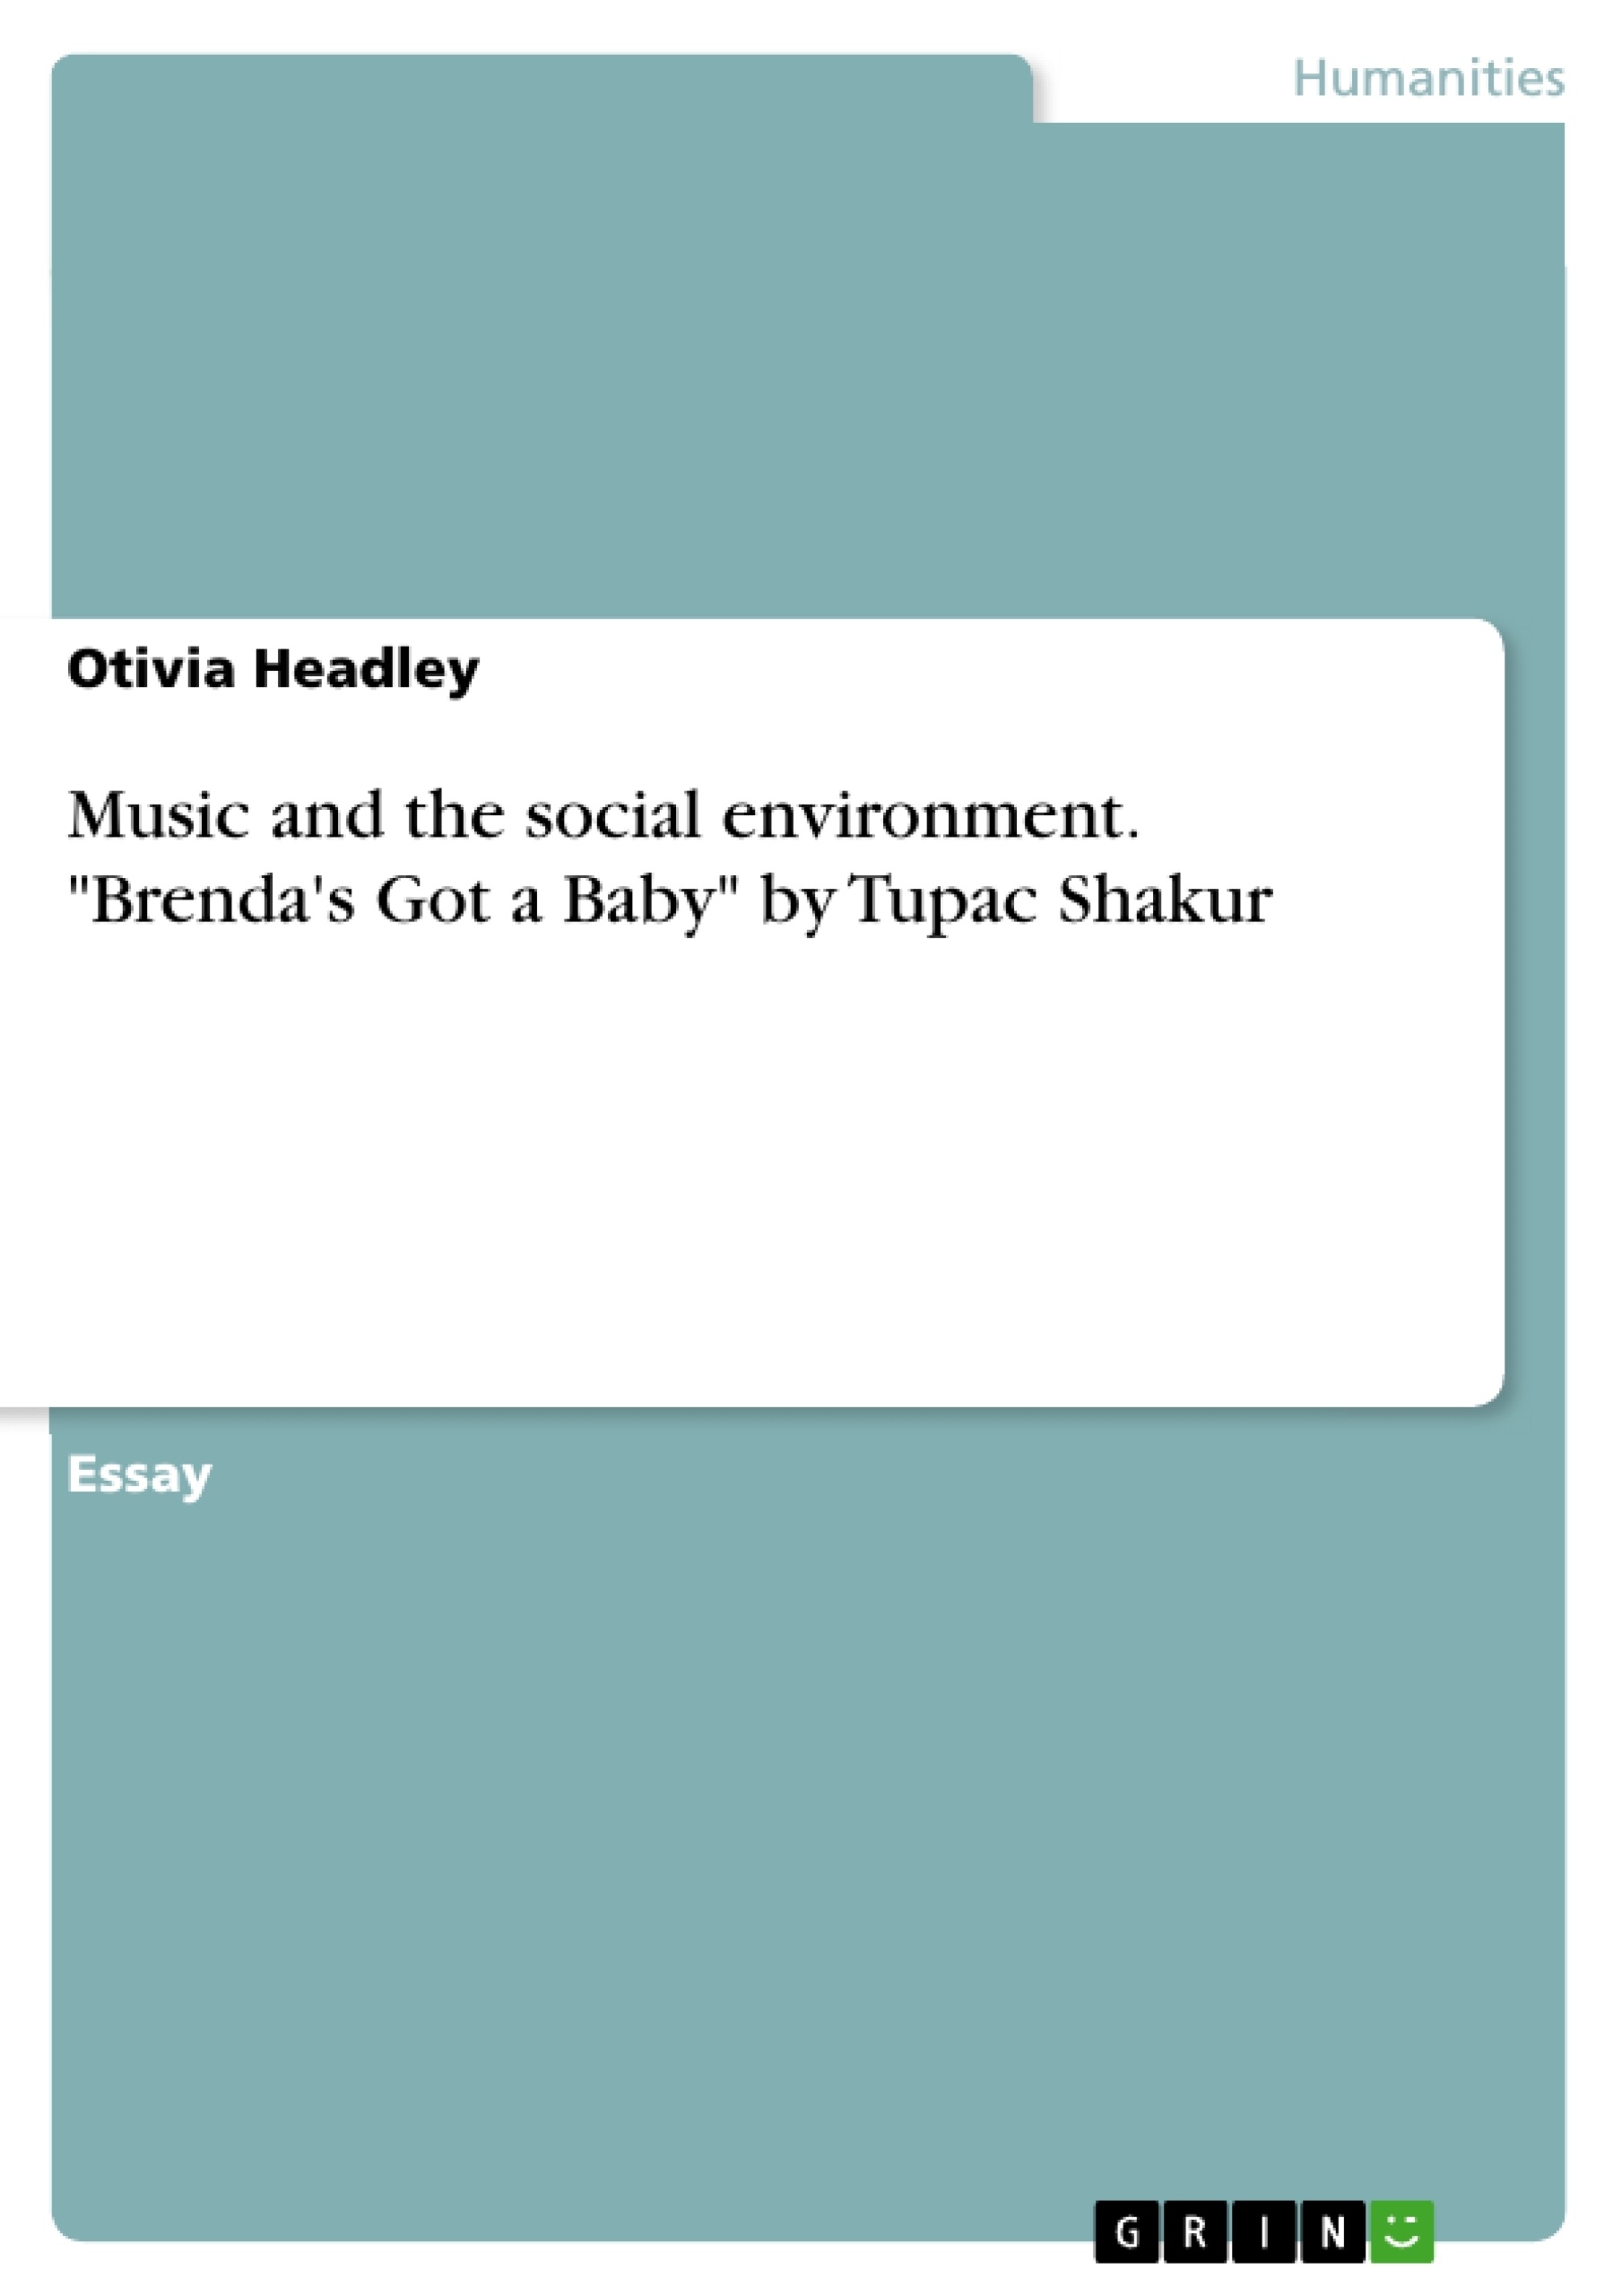 Titel: Music and the social environment. "Brenda's Got a Baby" by Tupac Shakur